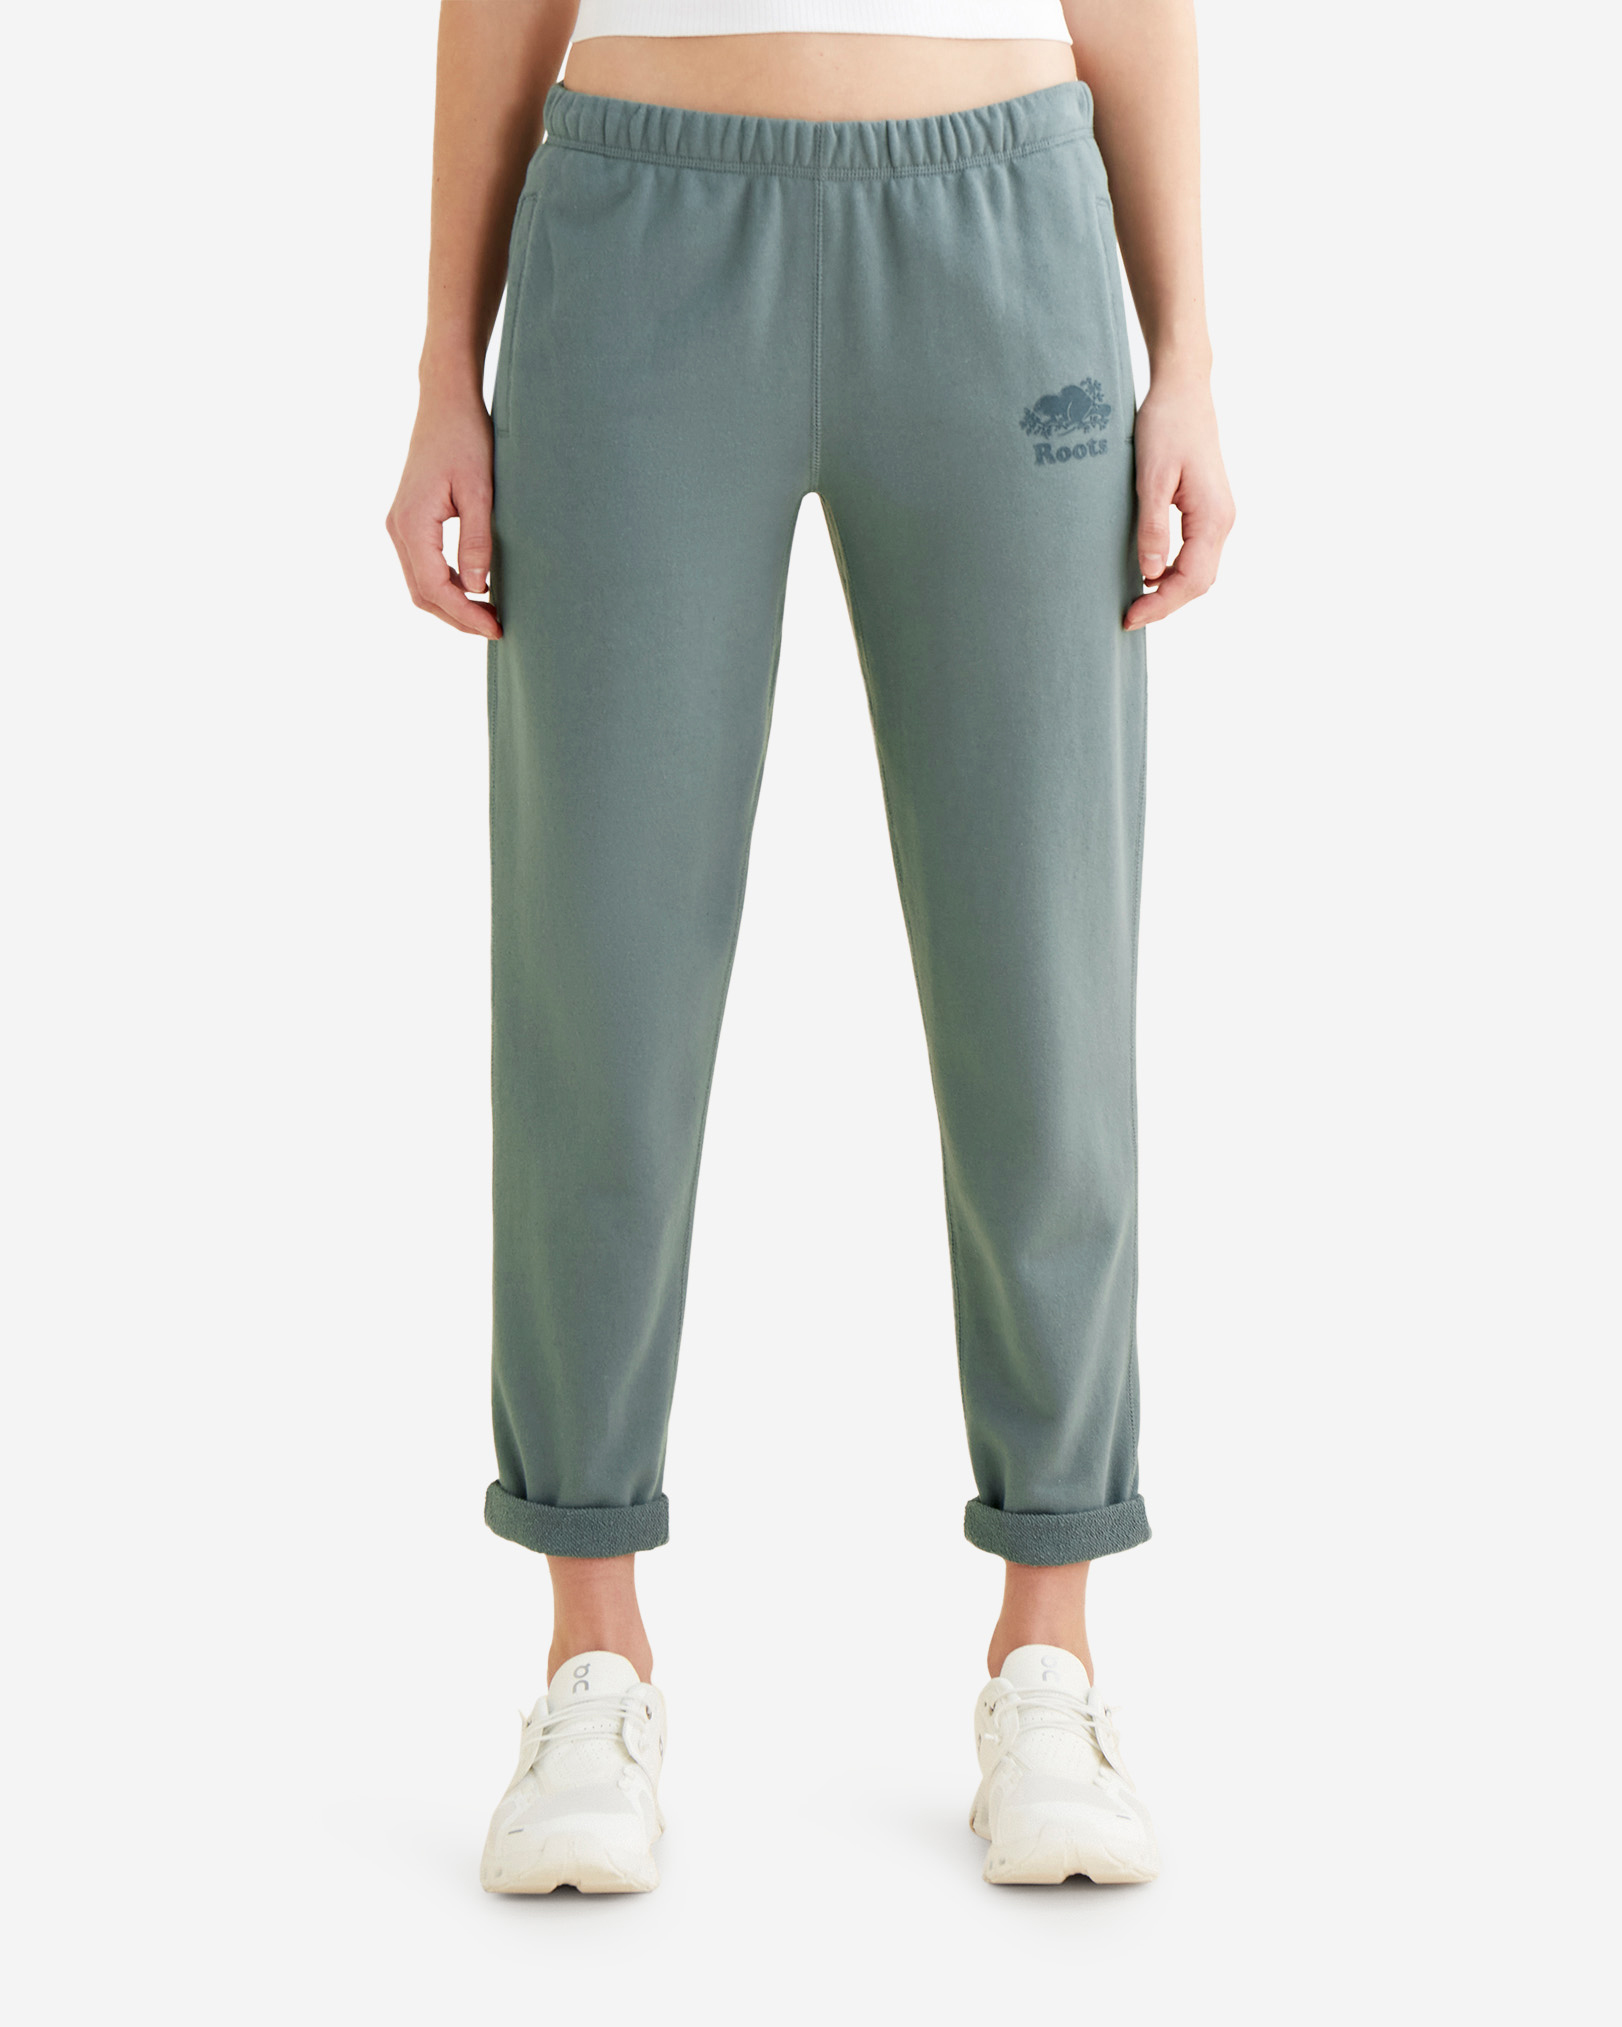 Roots Organic Easy Ankle Sweatpant in Balsam Green